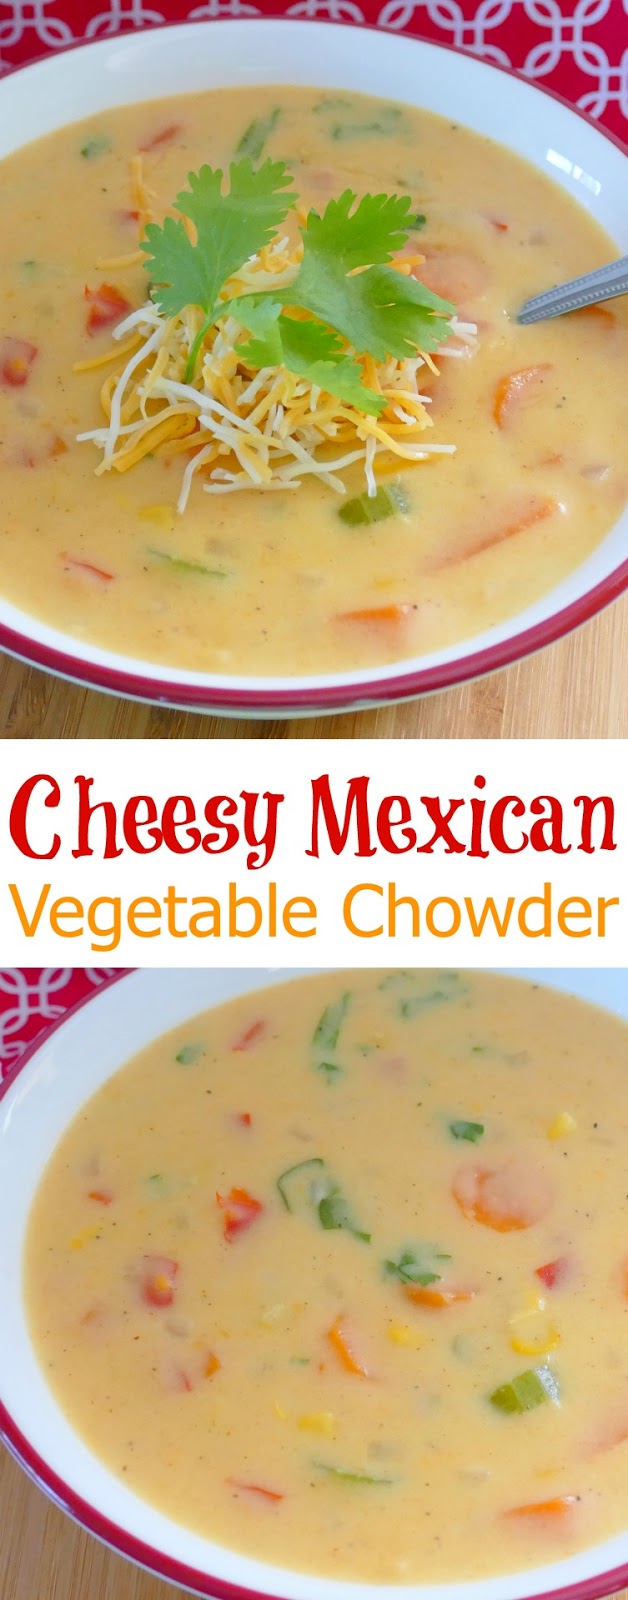 This easy, meatless soup is ready in 30 minutes! The Mexican flavors make this cheesy chowder absolutely delicious! The combo of carrots, celery, onion, bell pepper and corn make this soup so hearty! Add shredded rotisserie chicken if you're a meat lover!